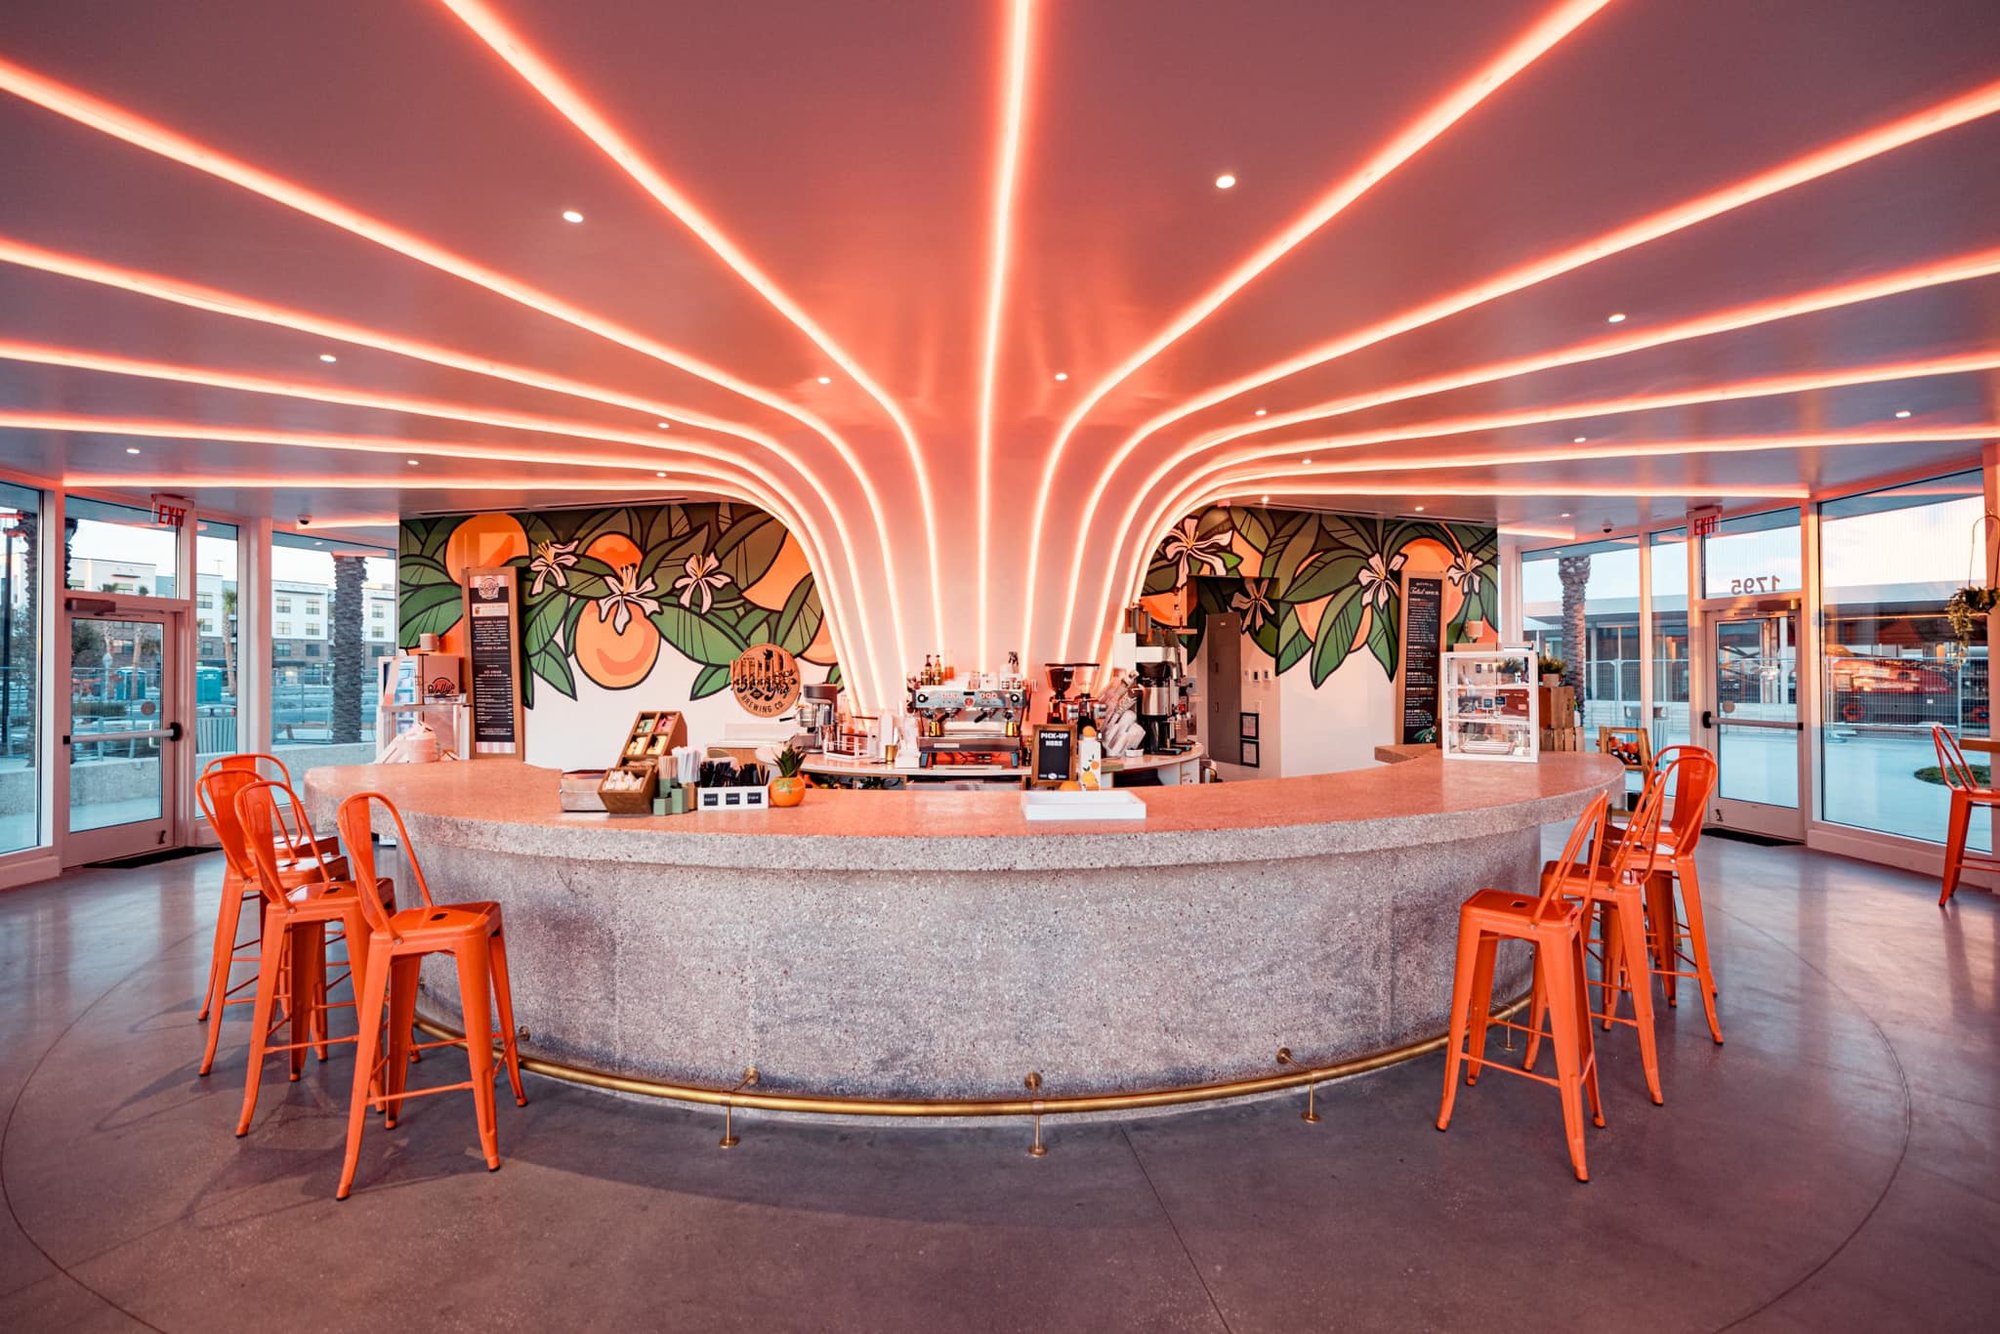 inside of juice stand with orange accents